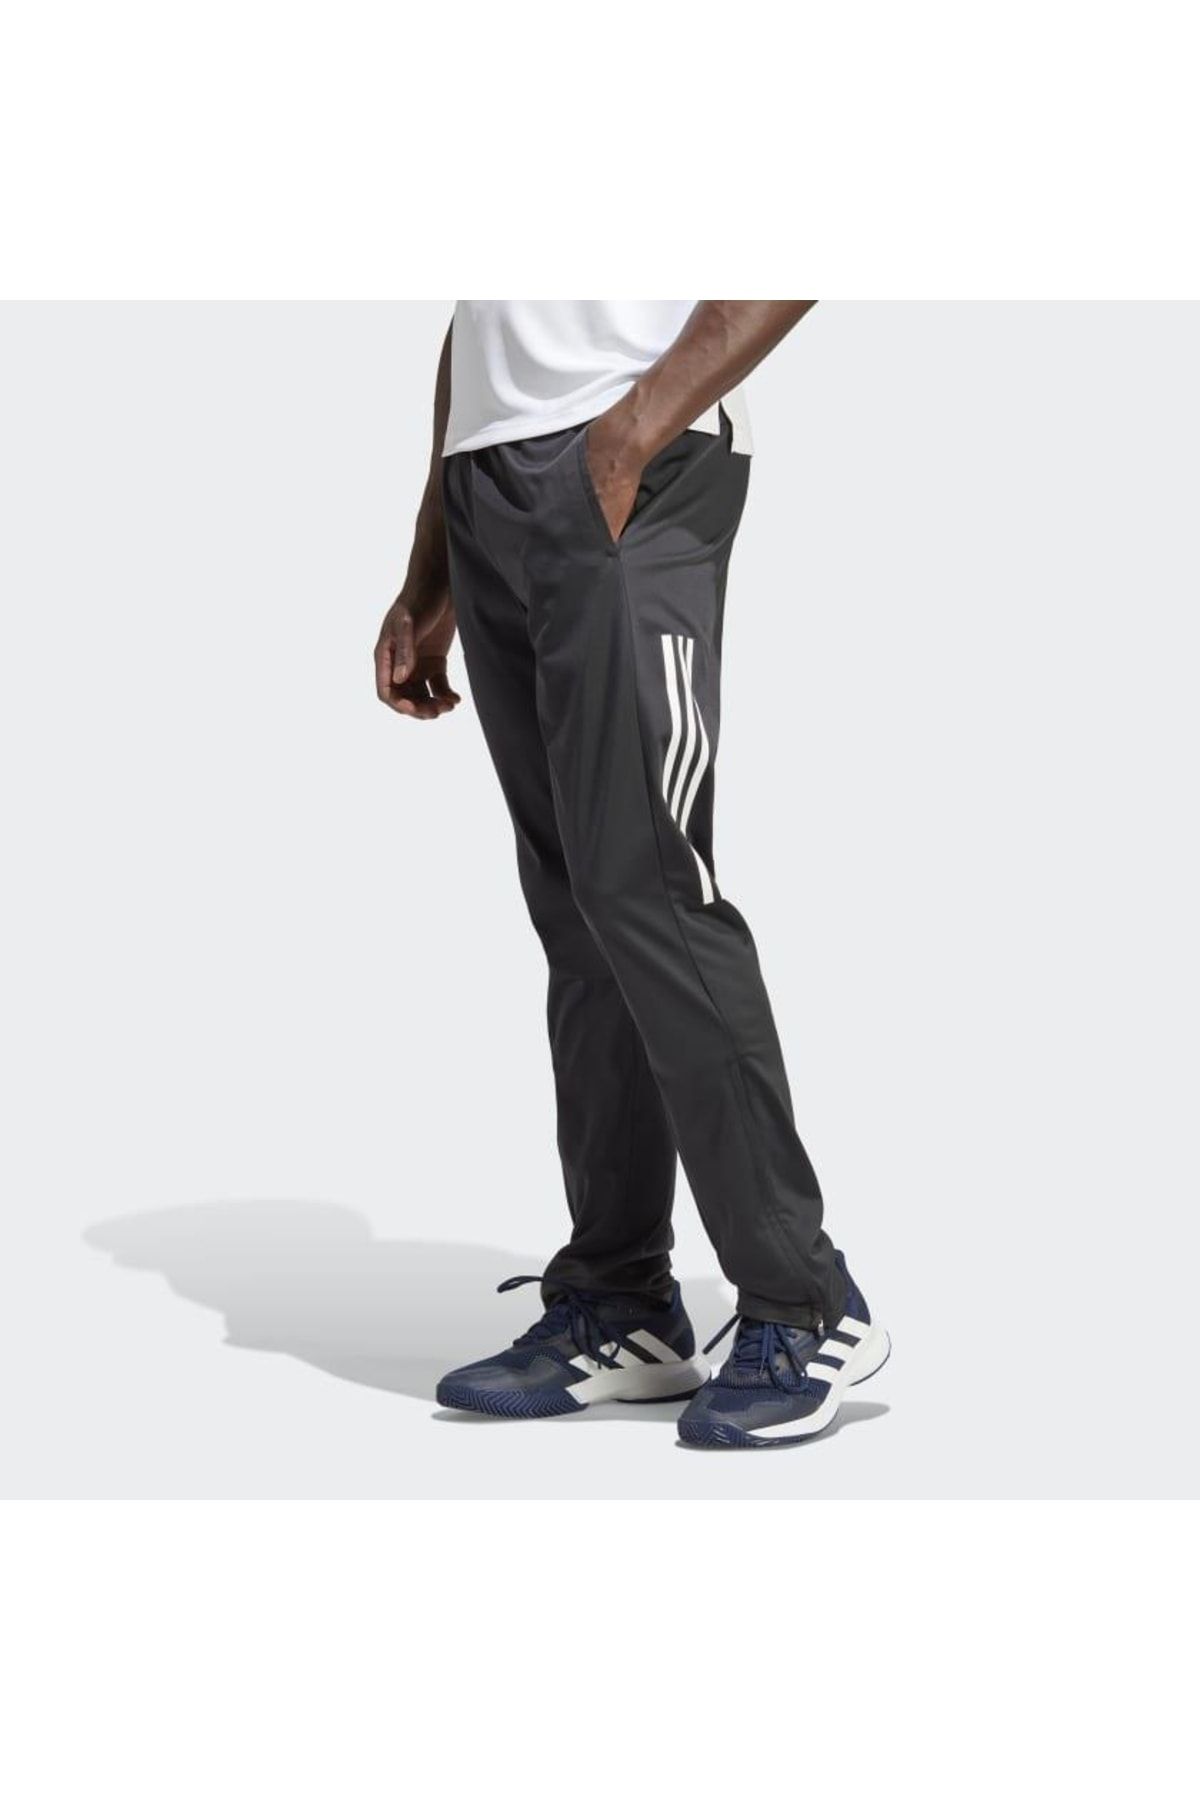 adidas Black 3-stripes Knitted Tennis Joggers Ht7180